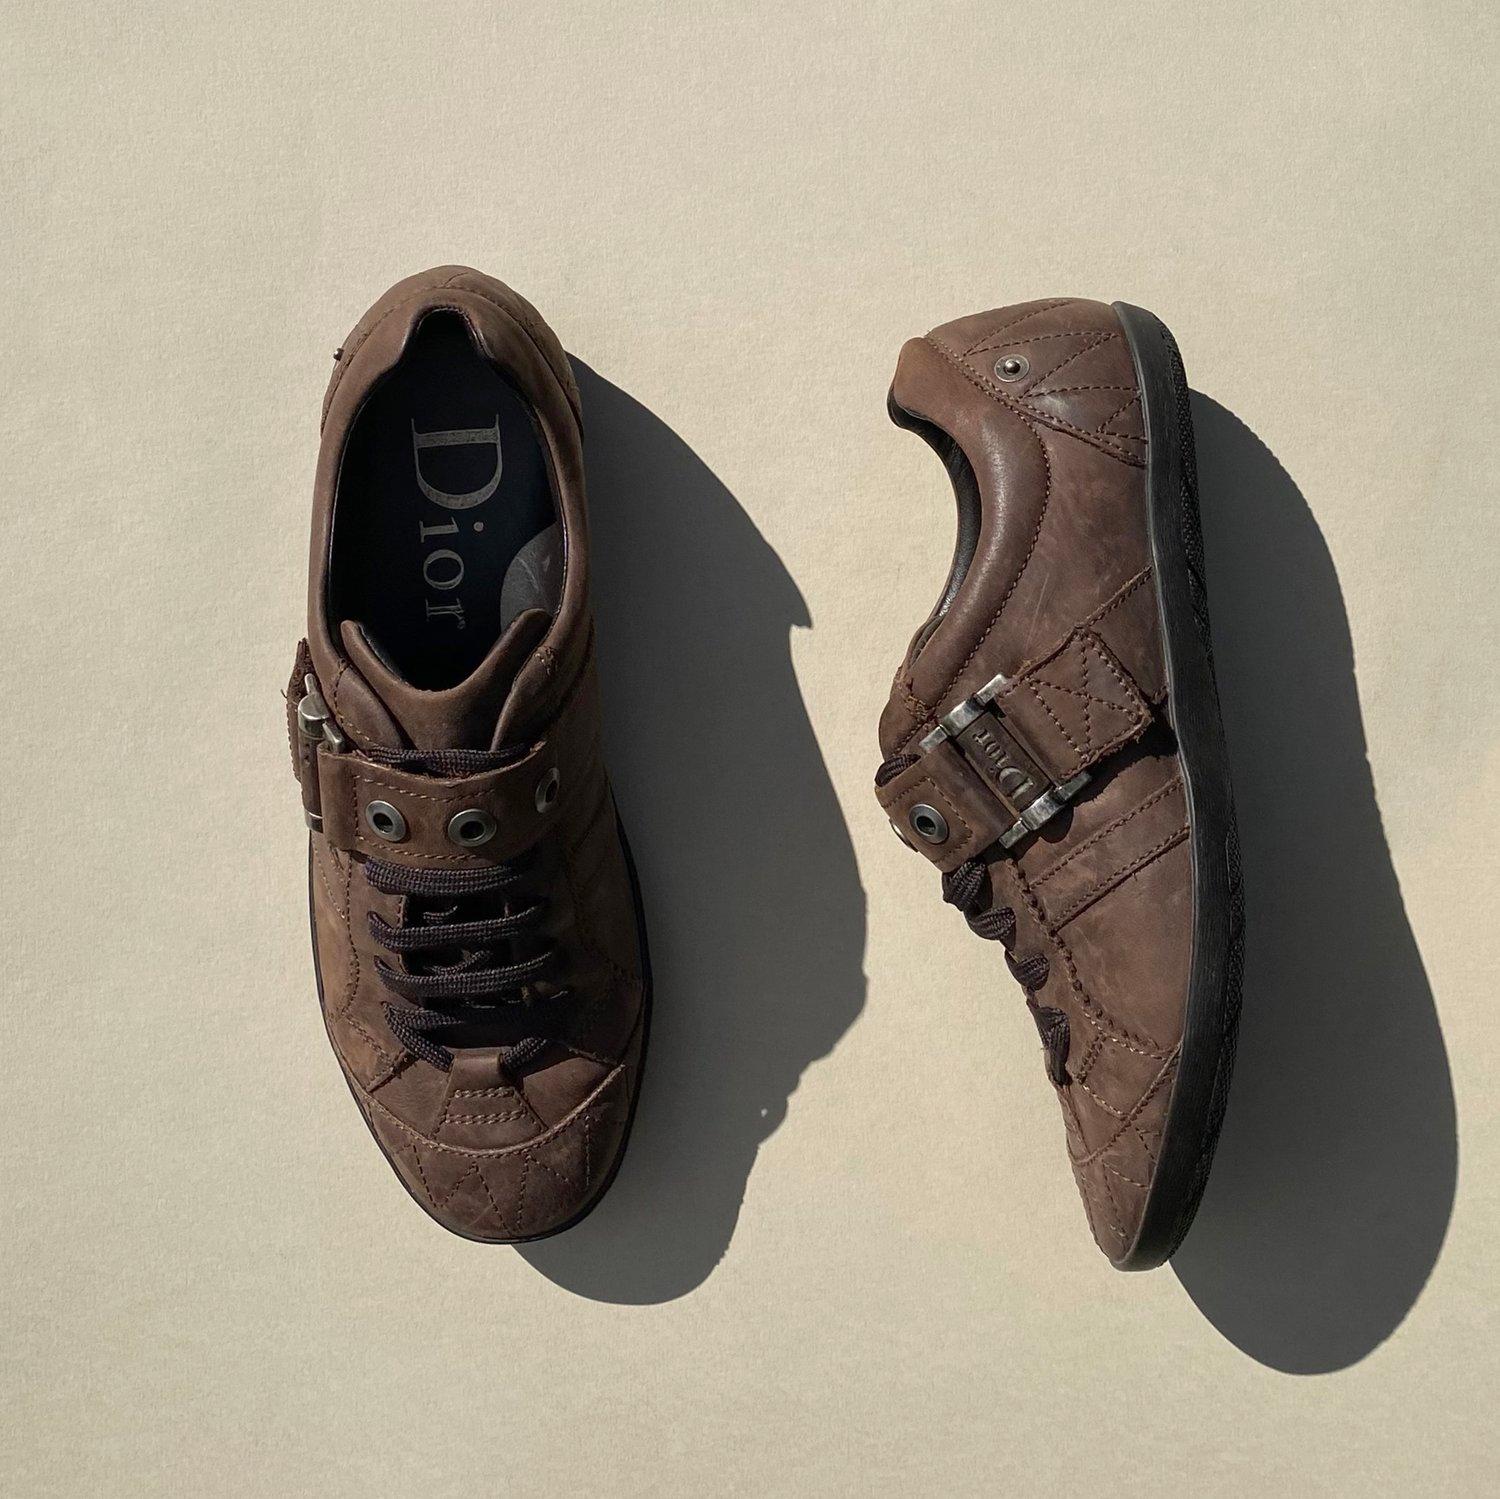 Vintage brown leather trainers by Dior from the early 2000’s. John Galliano era. In a brown leather finish, with lace up and pull over fastenings. Featuring the brands classic Dior logo in silver hardware to the fastenings and logo engraved into the